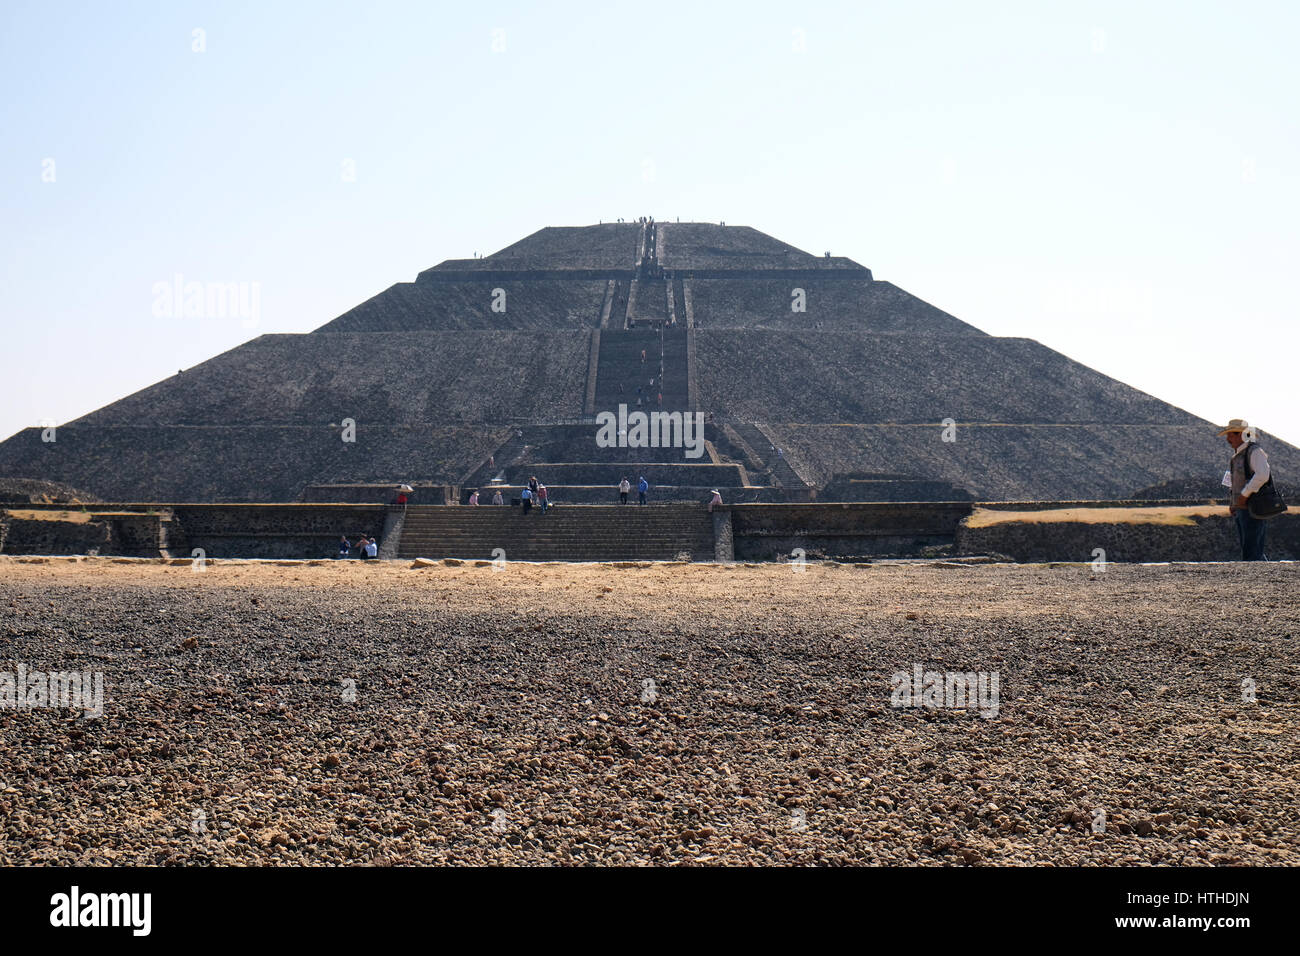 Teotihuacan historical complex, Valley of Mexico, State of Mexico. Stock Photo